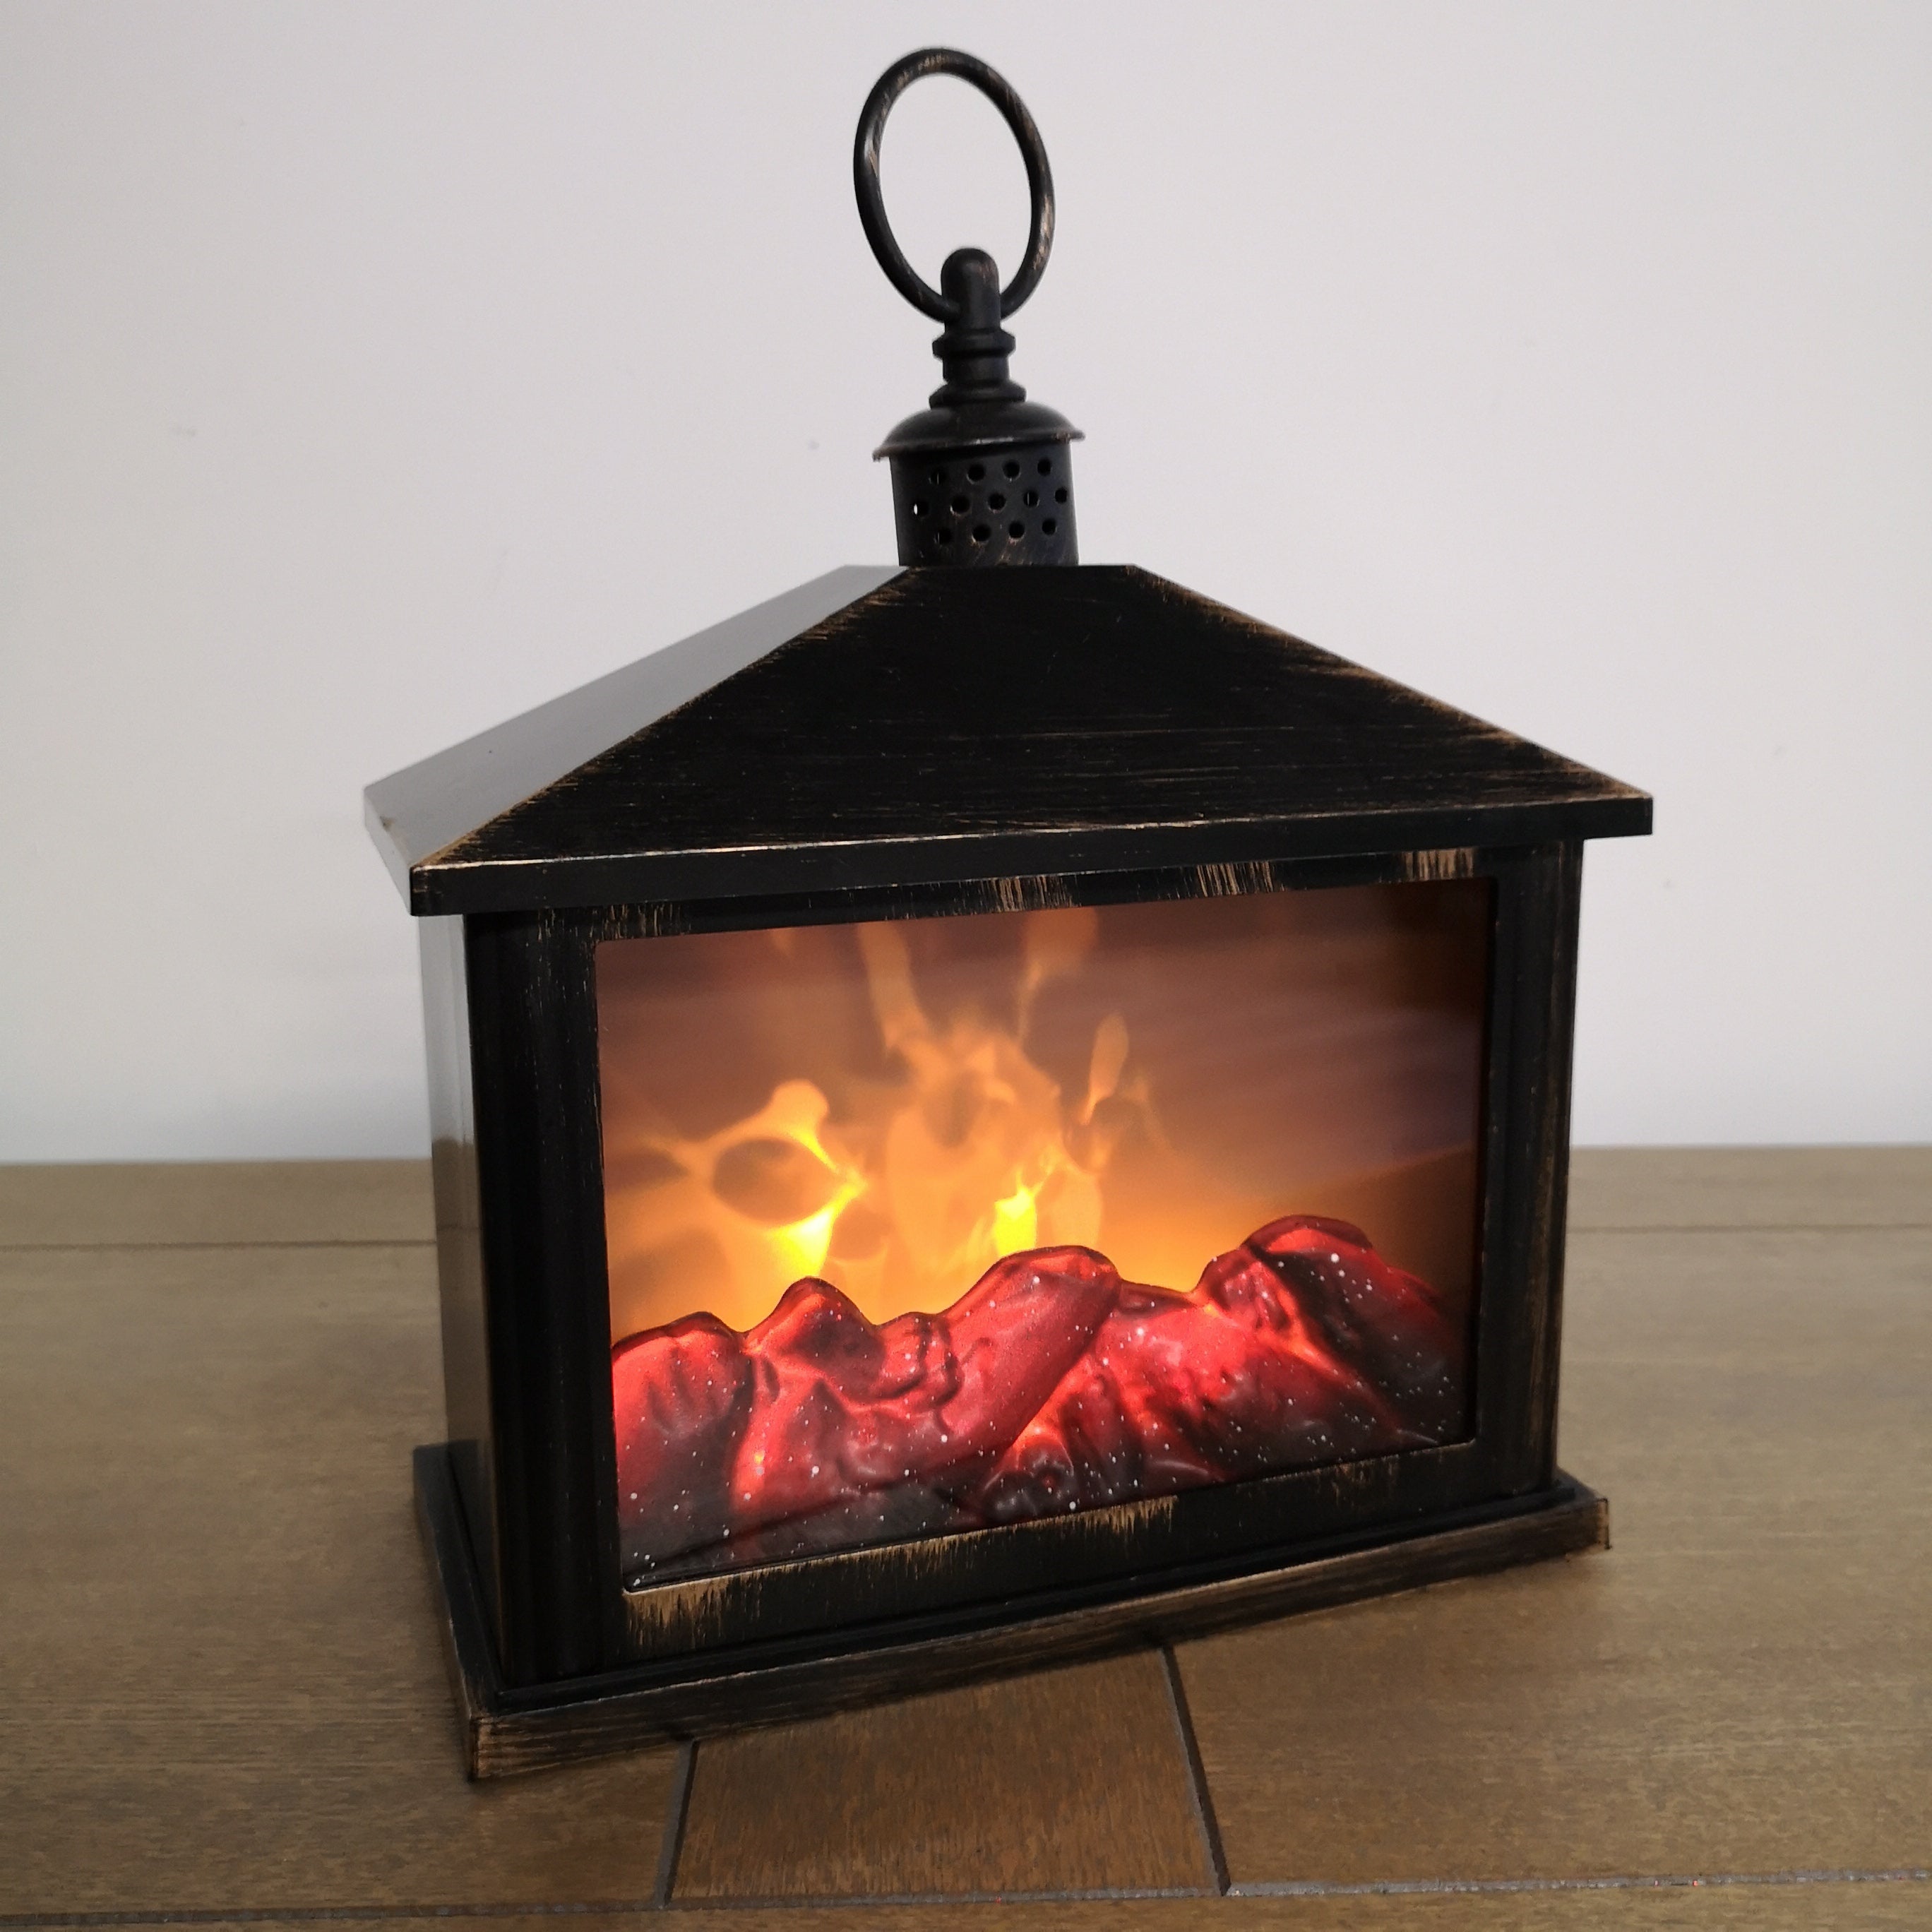 28cm Premier Christmas Battery Operated Fireplace Lantern with Realistic Flame Effect in Rustic Bronze